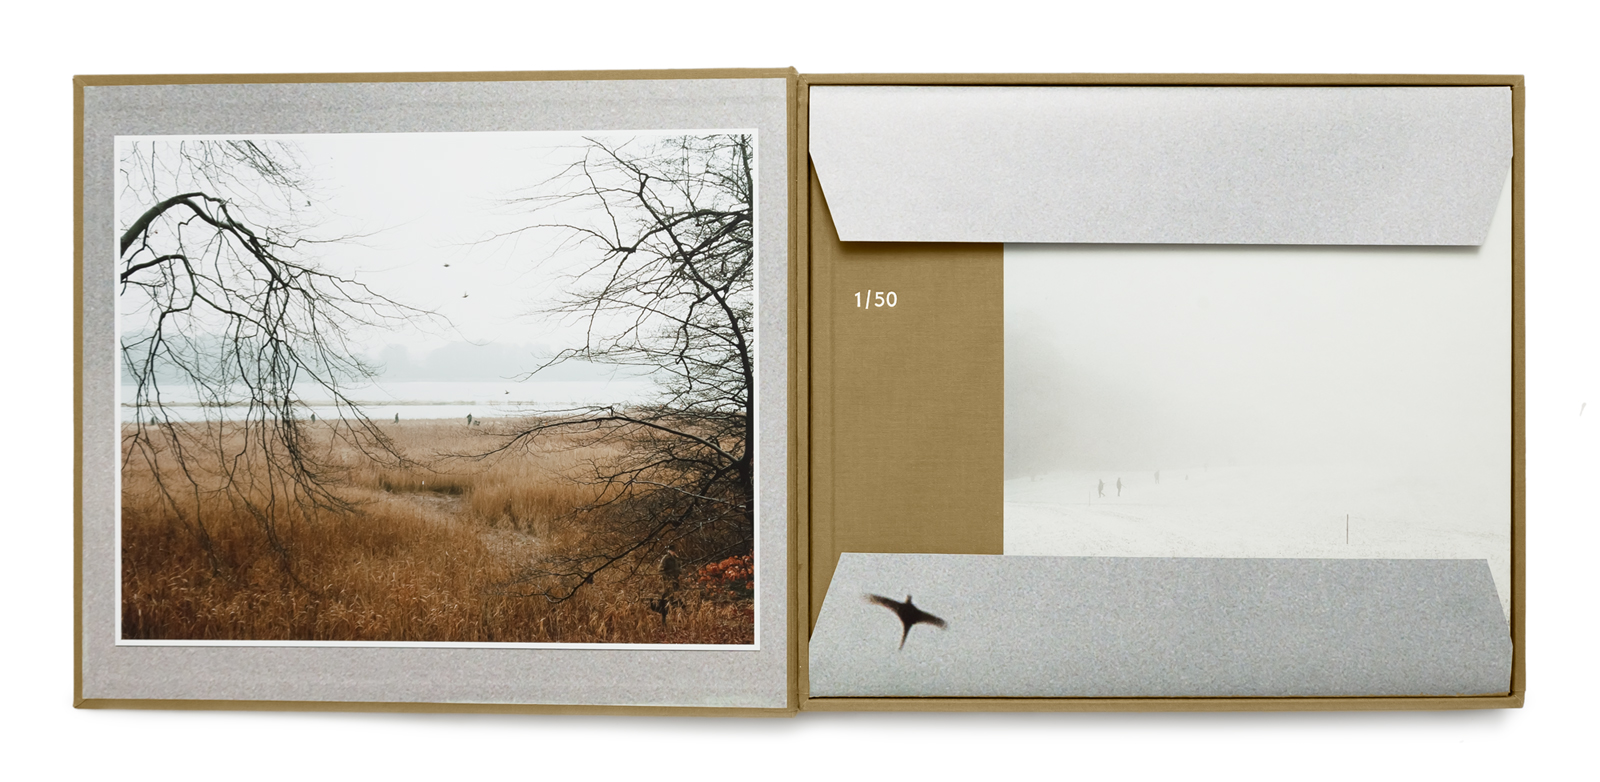 Special edition of Trine Søndergaard and Nicolai Howalt's book How To Hunt. Spread showing book, cover and signed print.